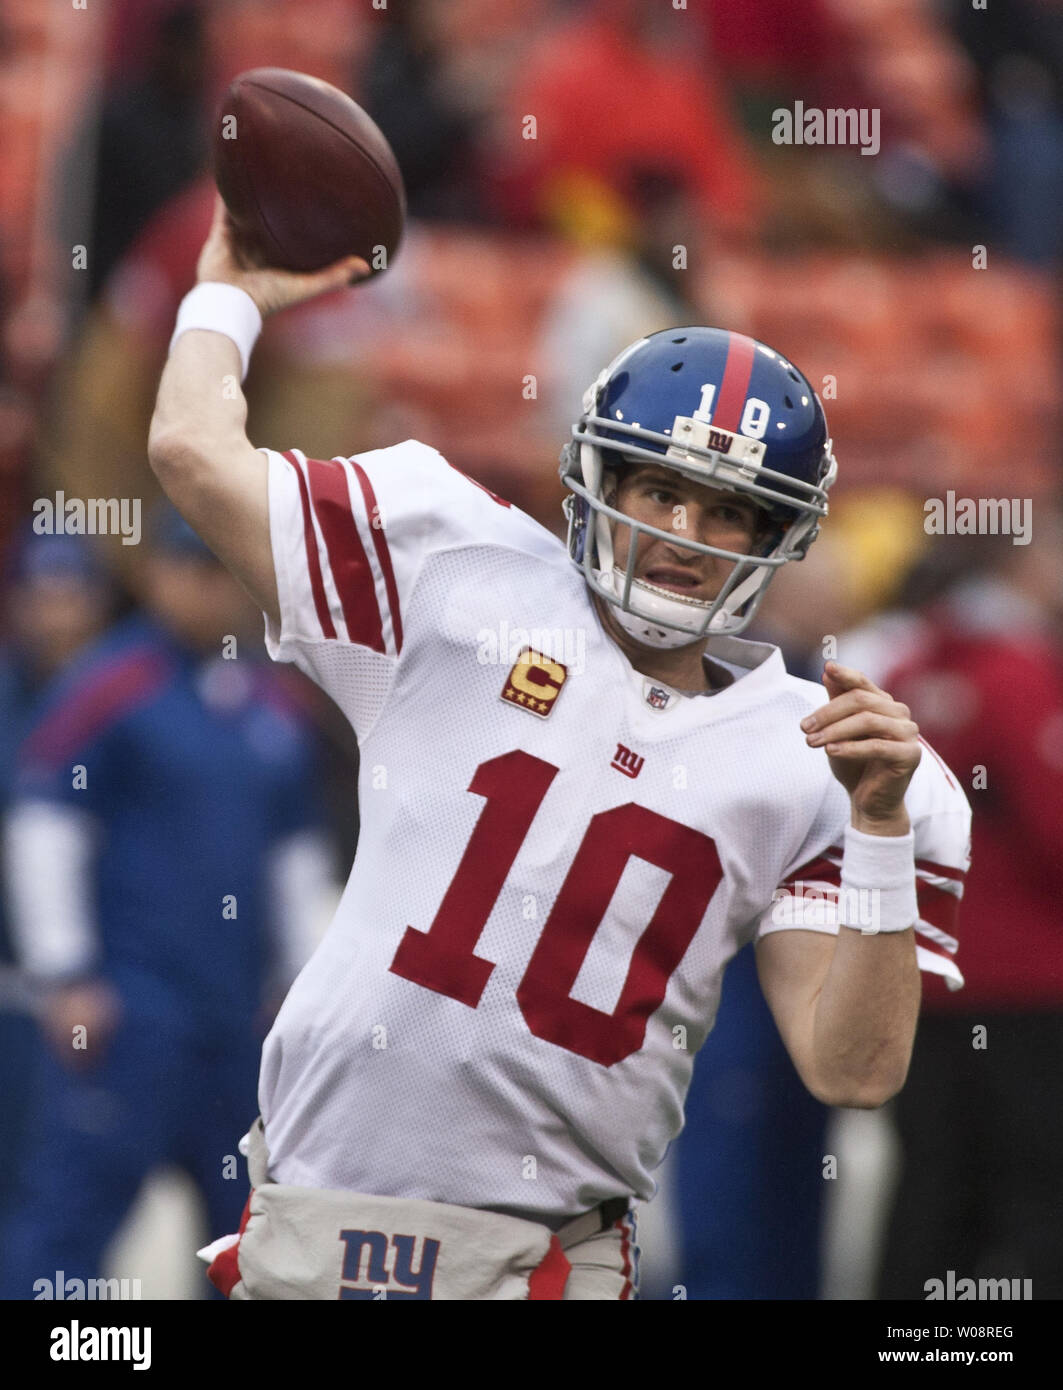 New York Giants  QB Eli Manning warms up to play theSan Francisco 49ers in the NFC Championship at Candlestick Park in San Francisco on January 22, 2012.    UPI/Terry Schmitt Stock Photo